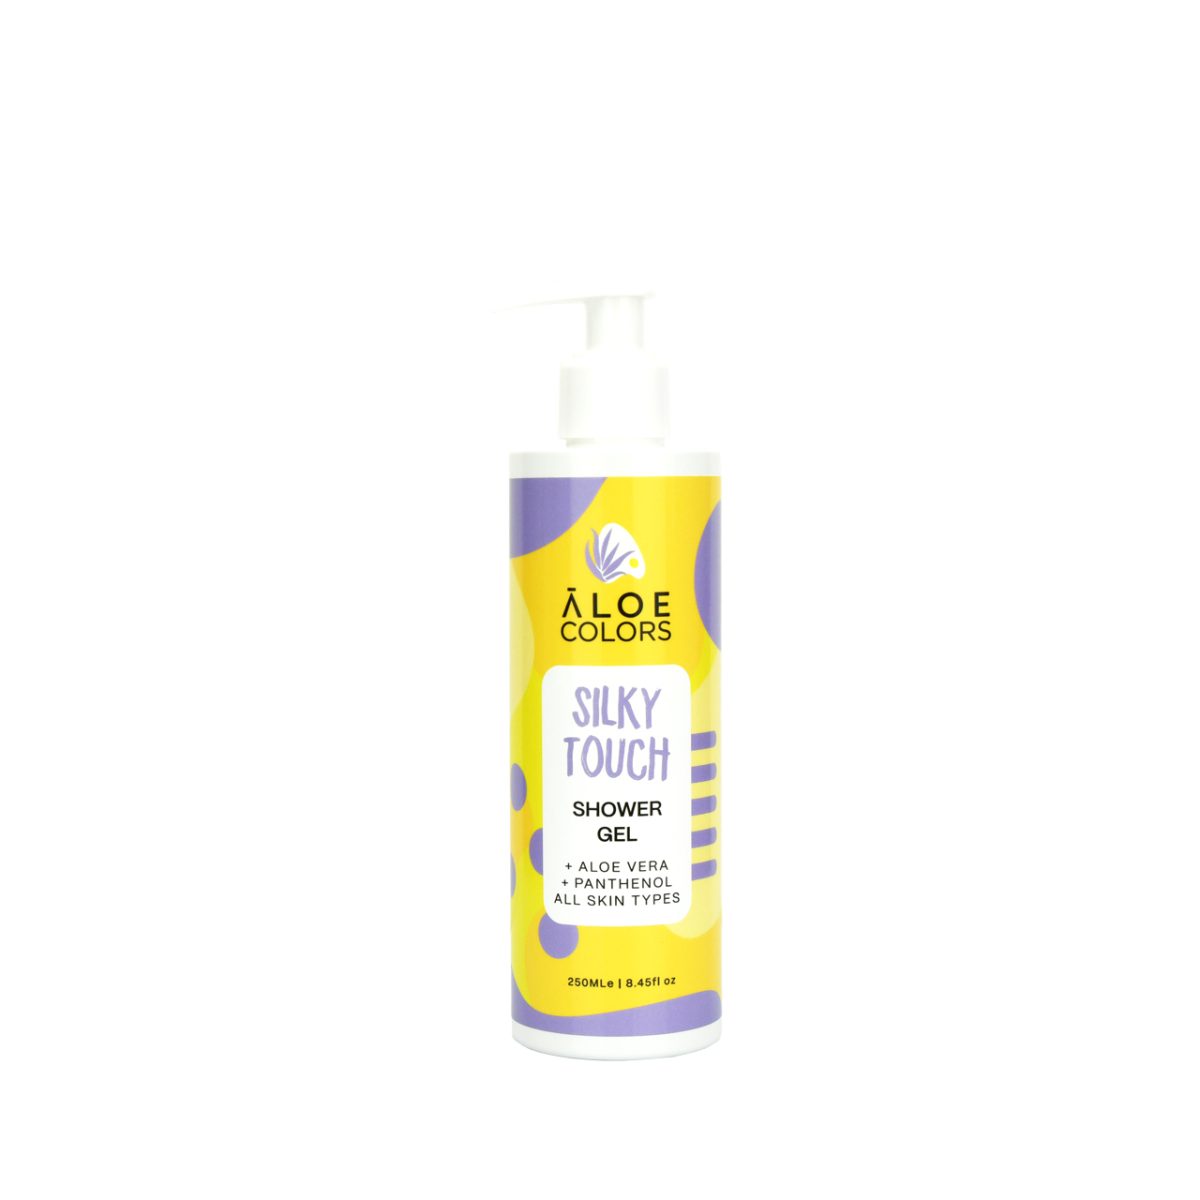 aloe-colors-silky-touch-shower-gel-250ml-mamaspharmacy